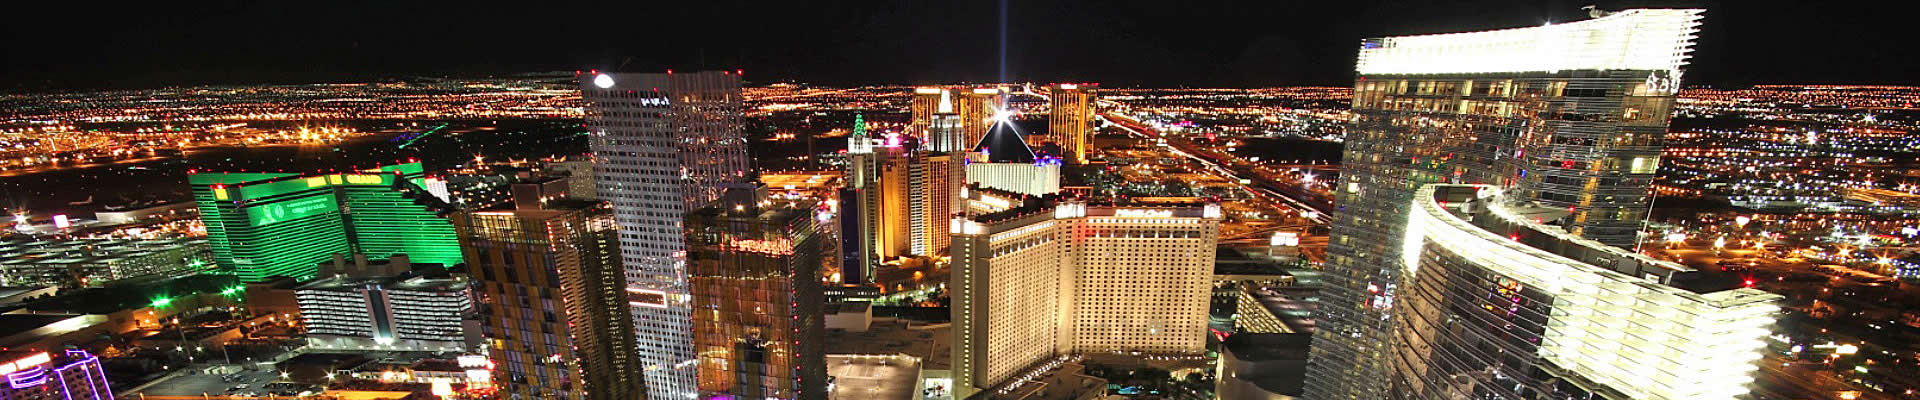 View of the Las Vegas Strip from a helicopter night flight